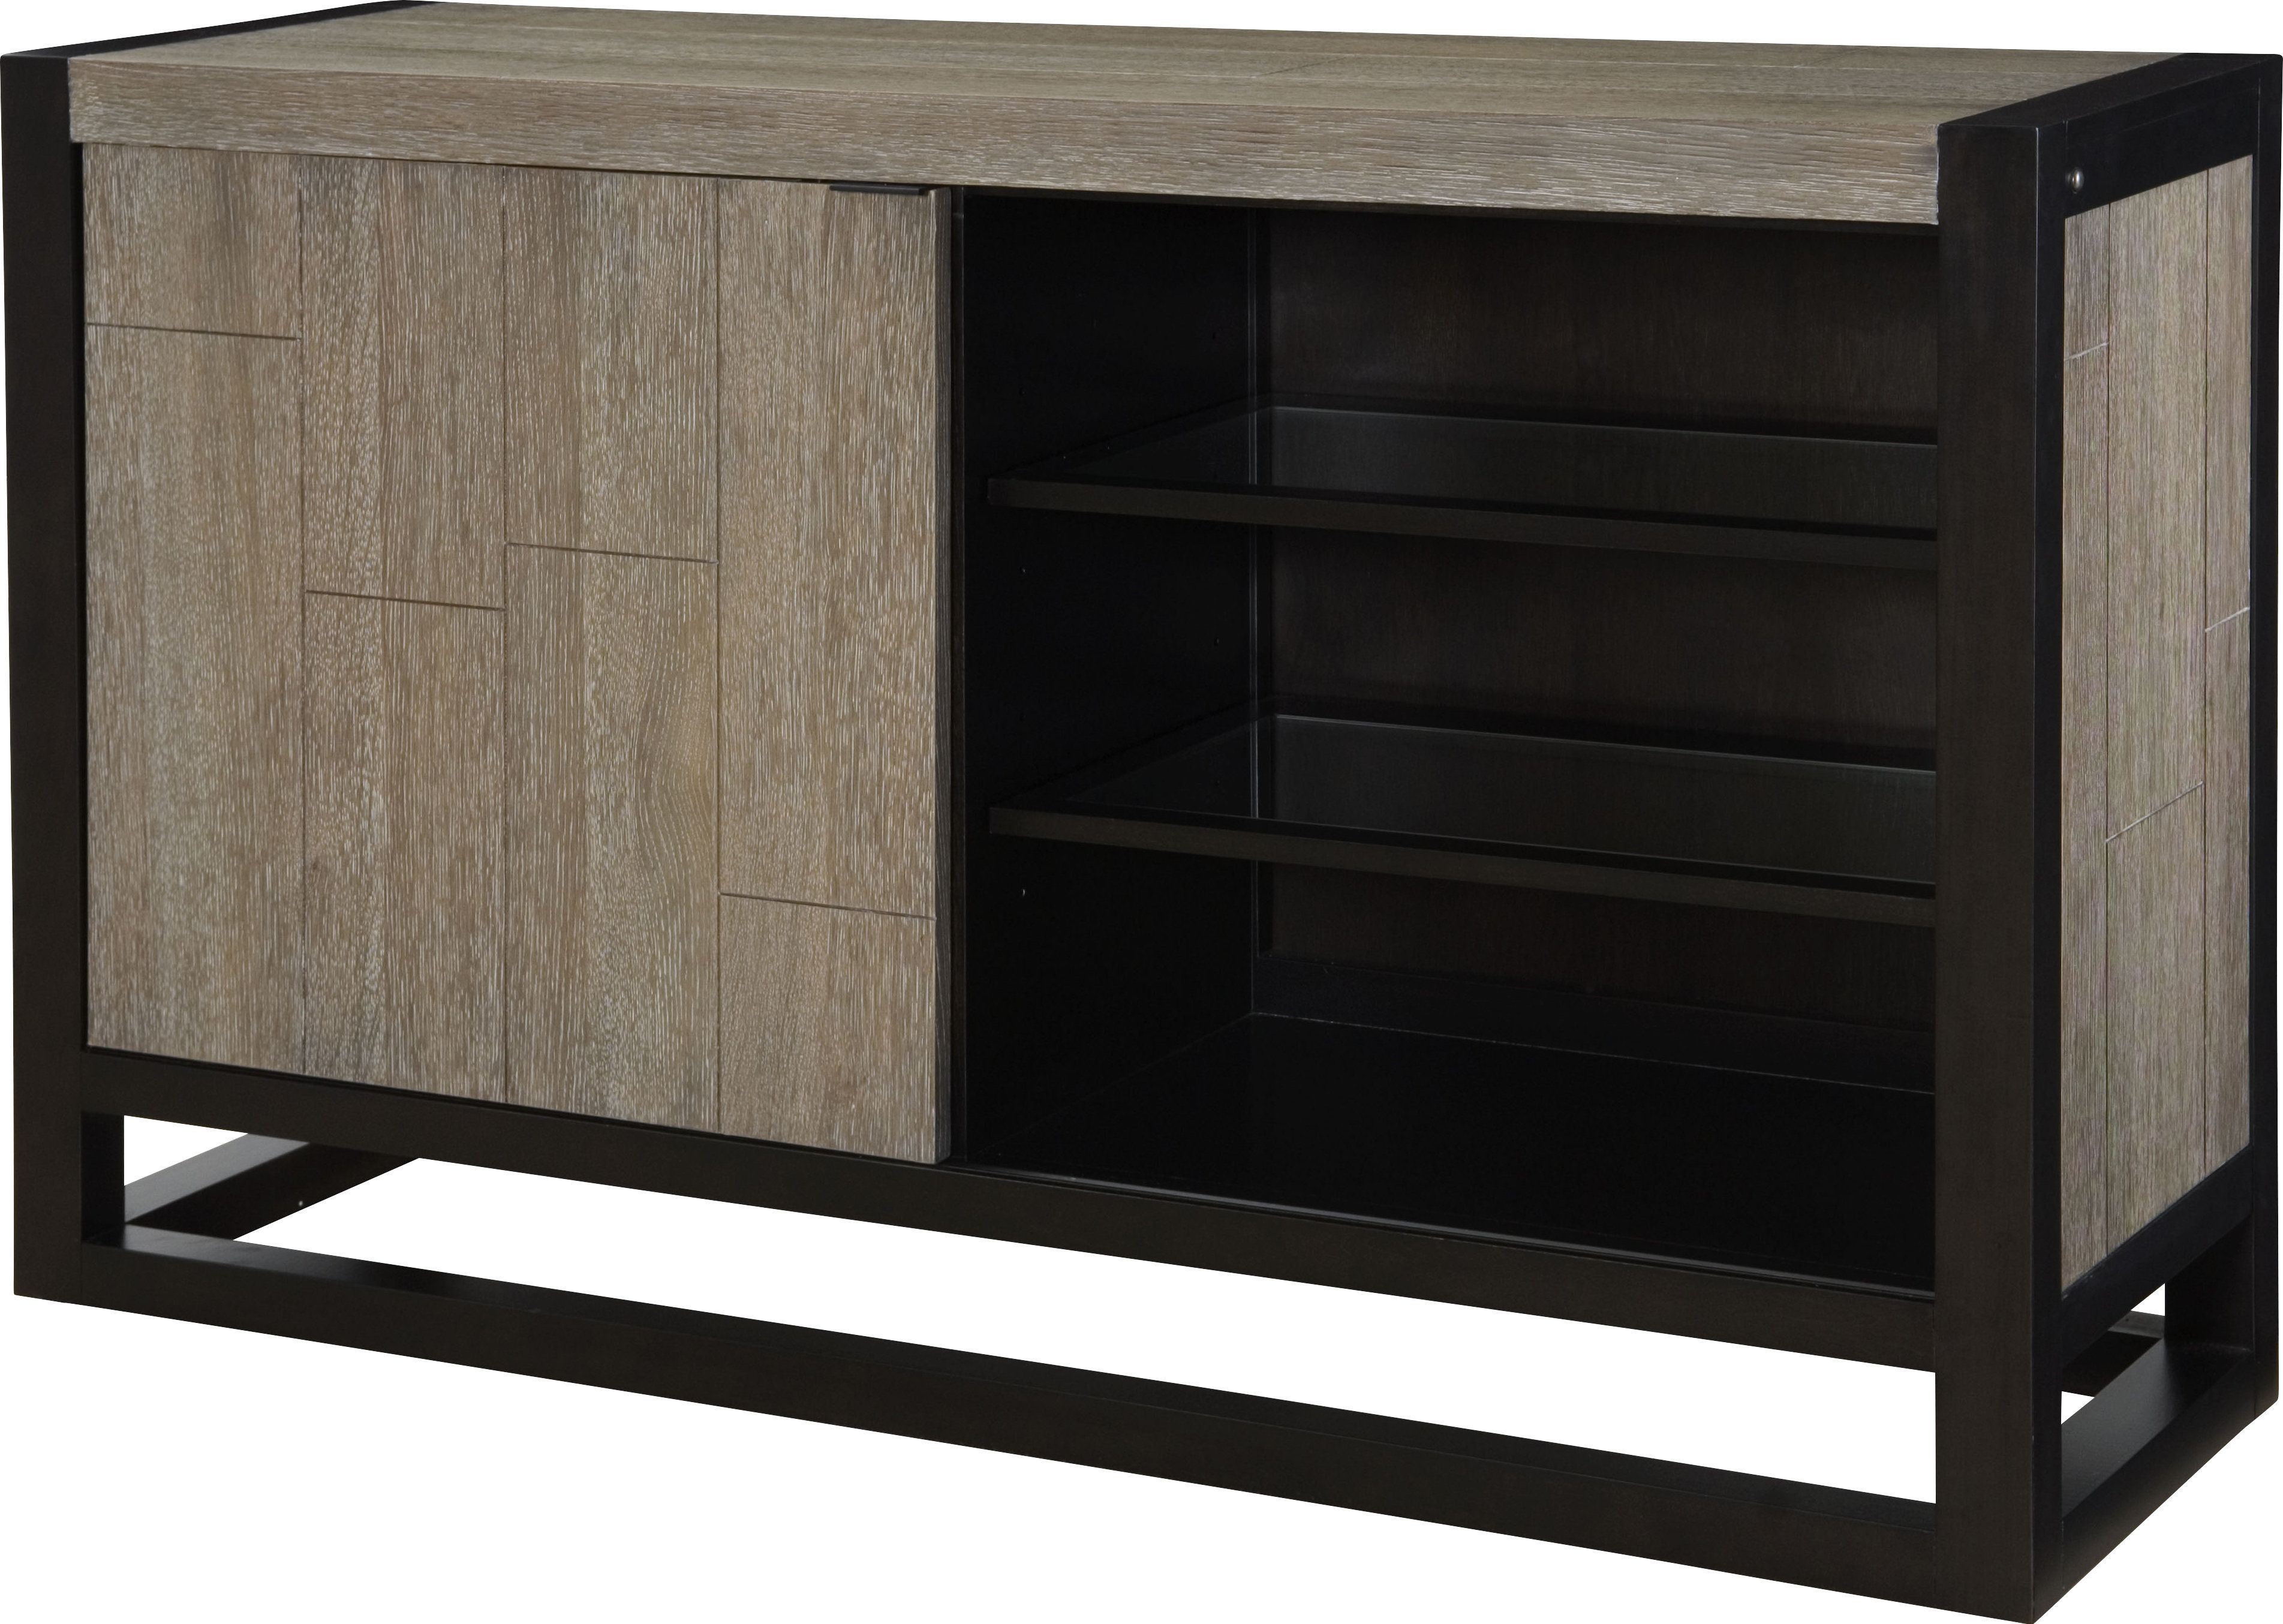 Silverware Storage Equipped Sideboards & Buffets | Joss & Main Pertaining To Payton Serving Sideboards (View 18 of 30)